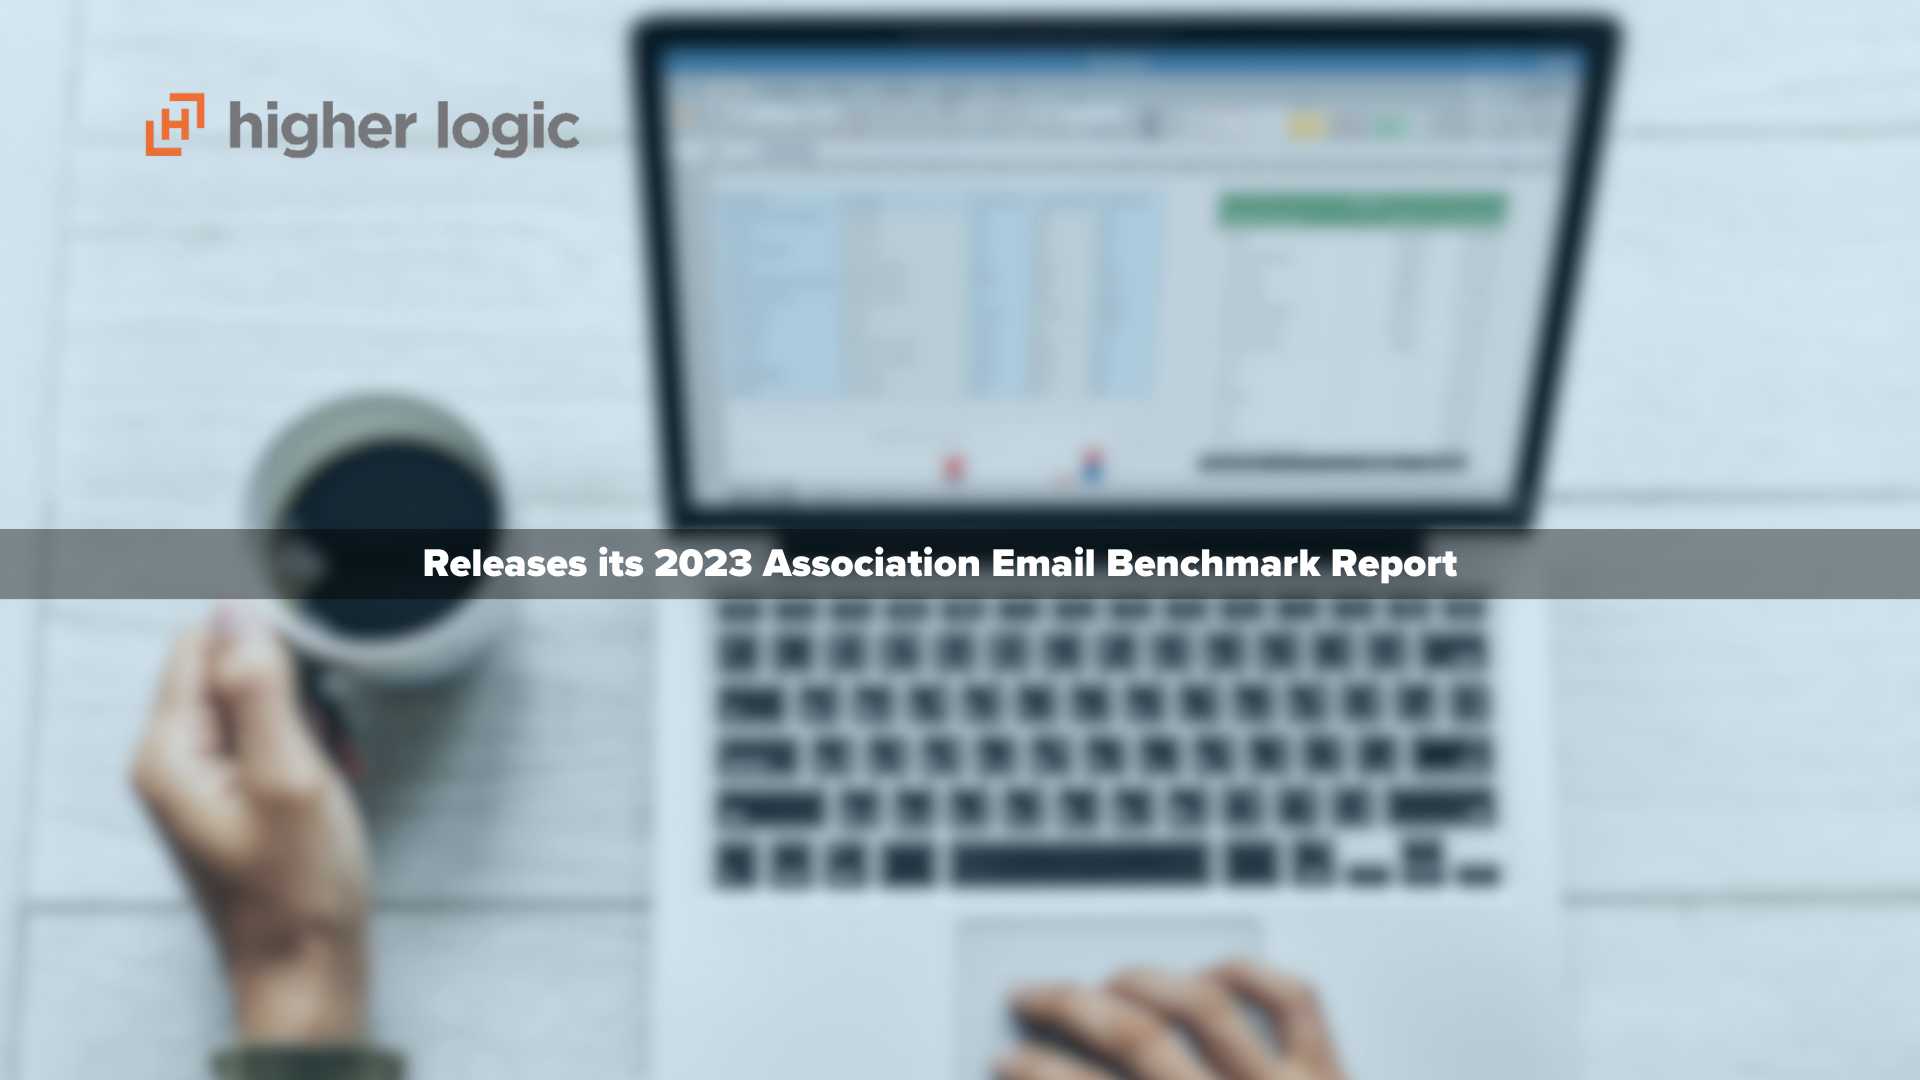 Higher Logic Releases its 2023 Association Email Benchmark Report